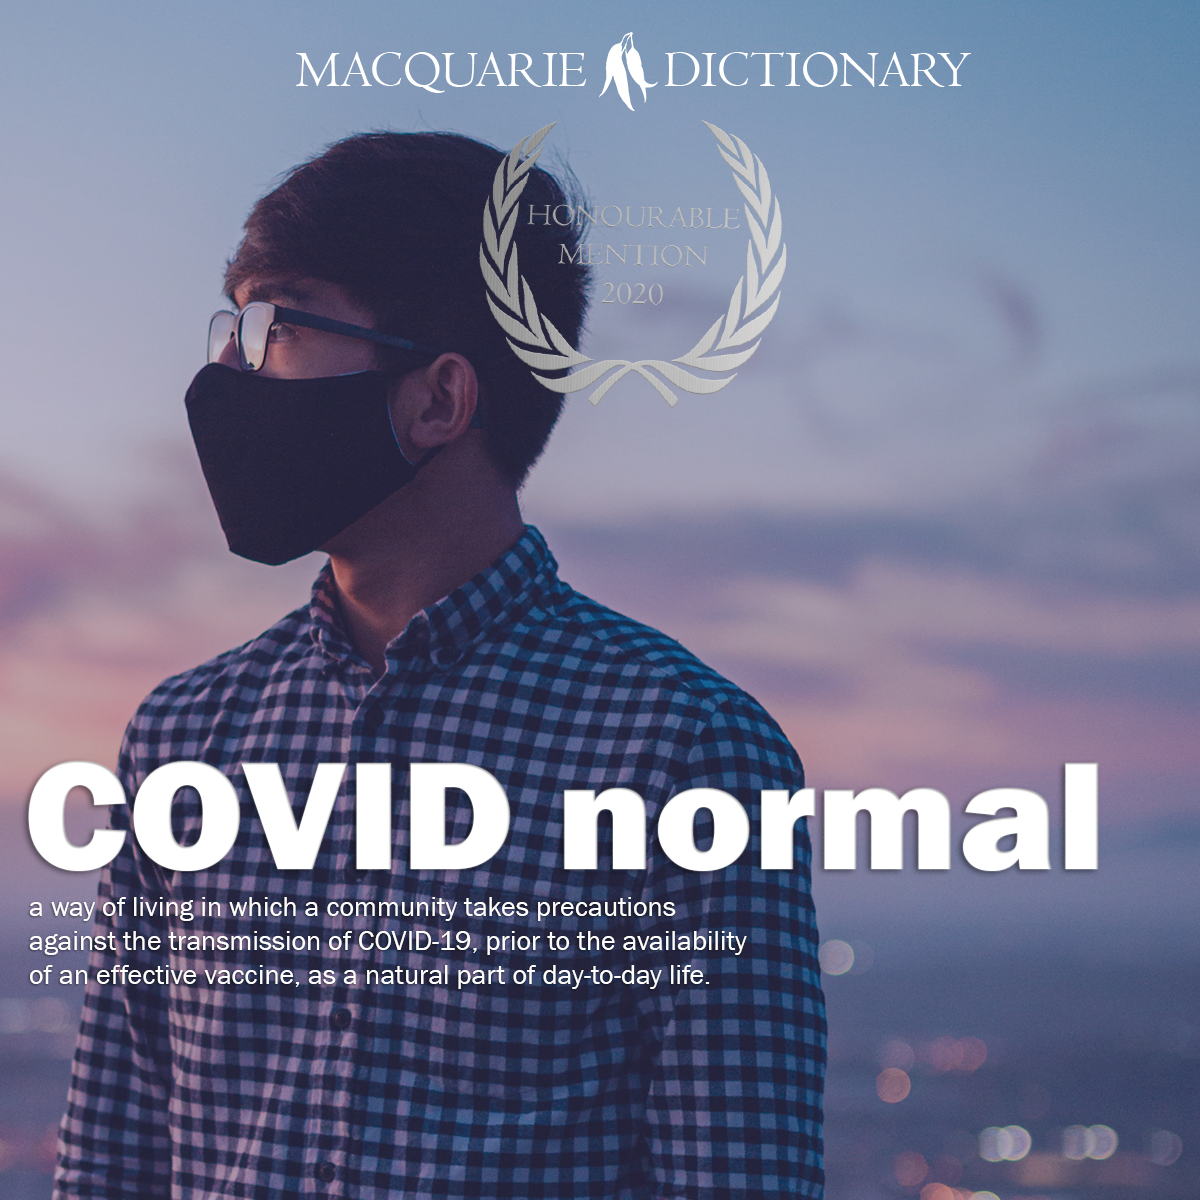 COVID normal - a way of living in which a community takes precautions against the transmission of COVID-19, prior to the availability of an effective vaccine, as a natural part of day-to-day life. 